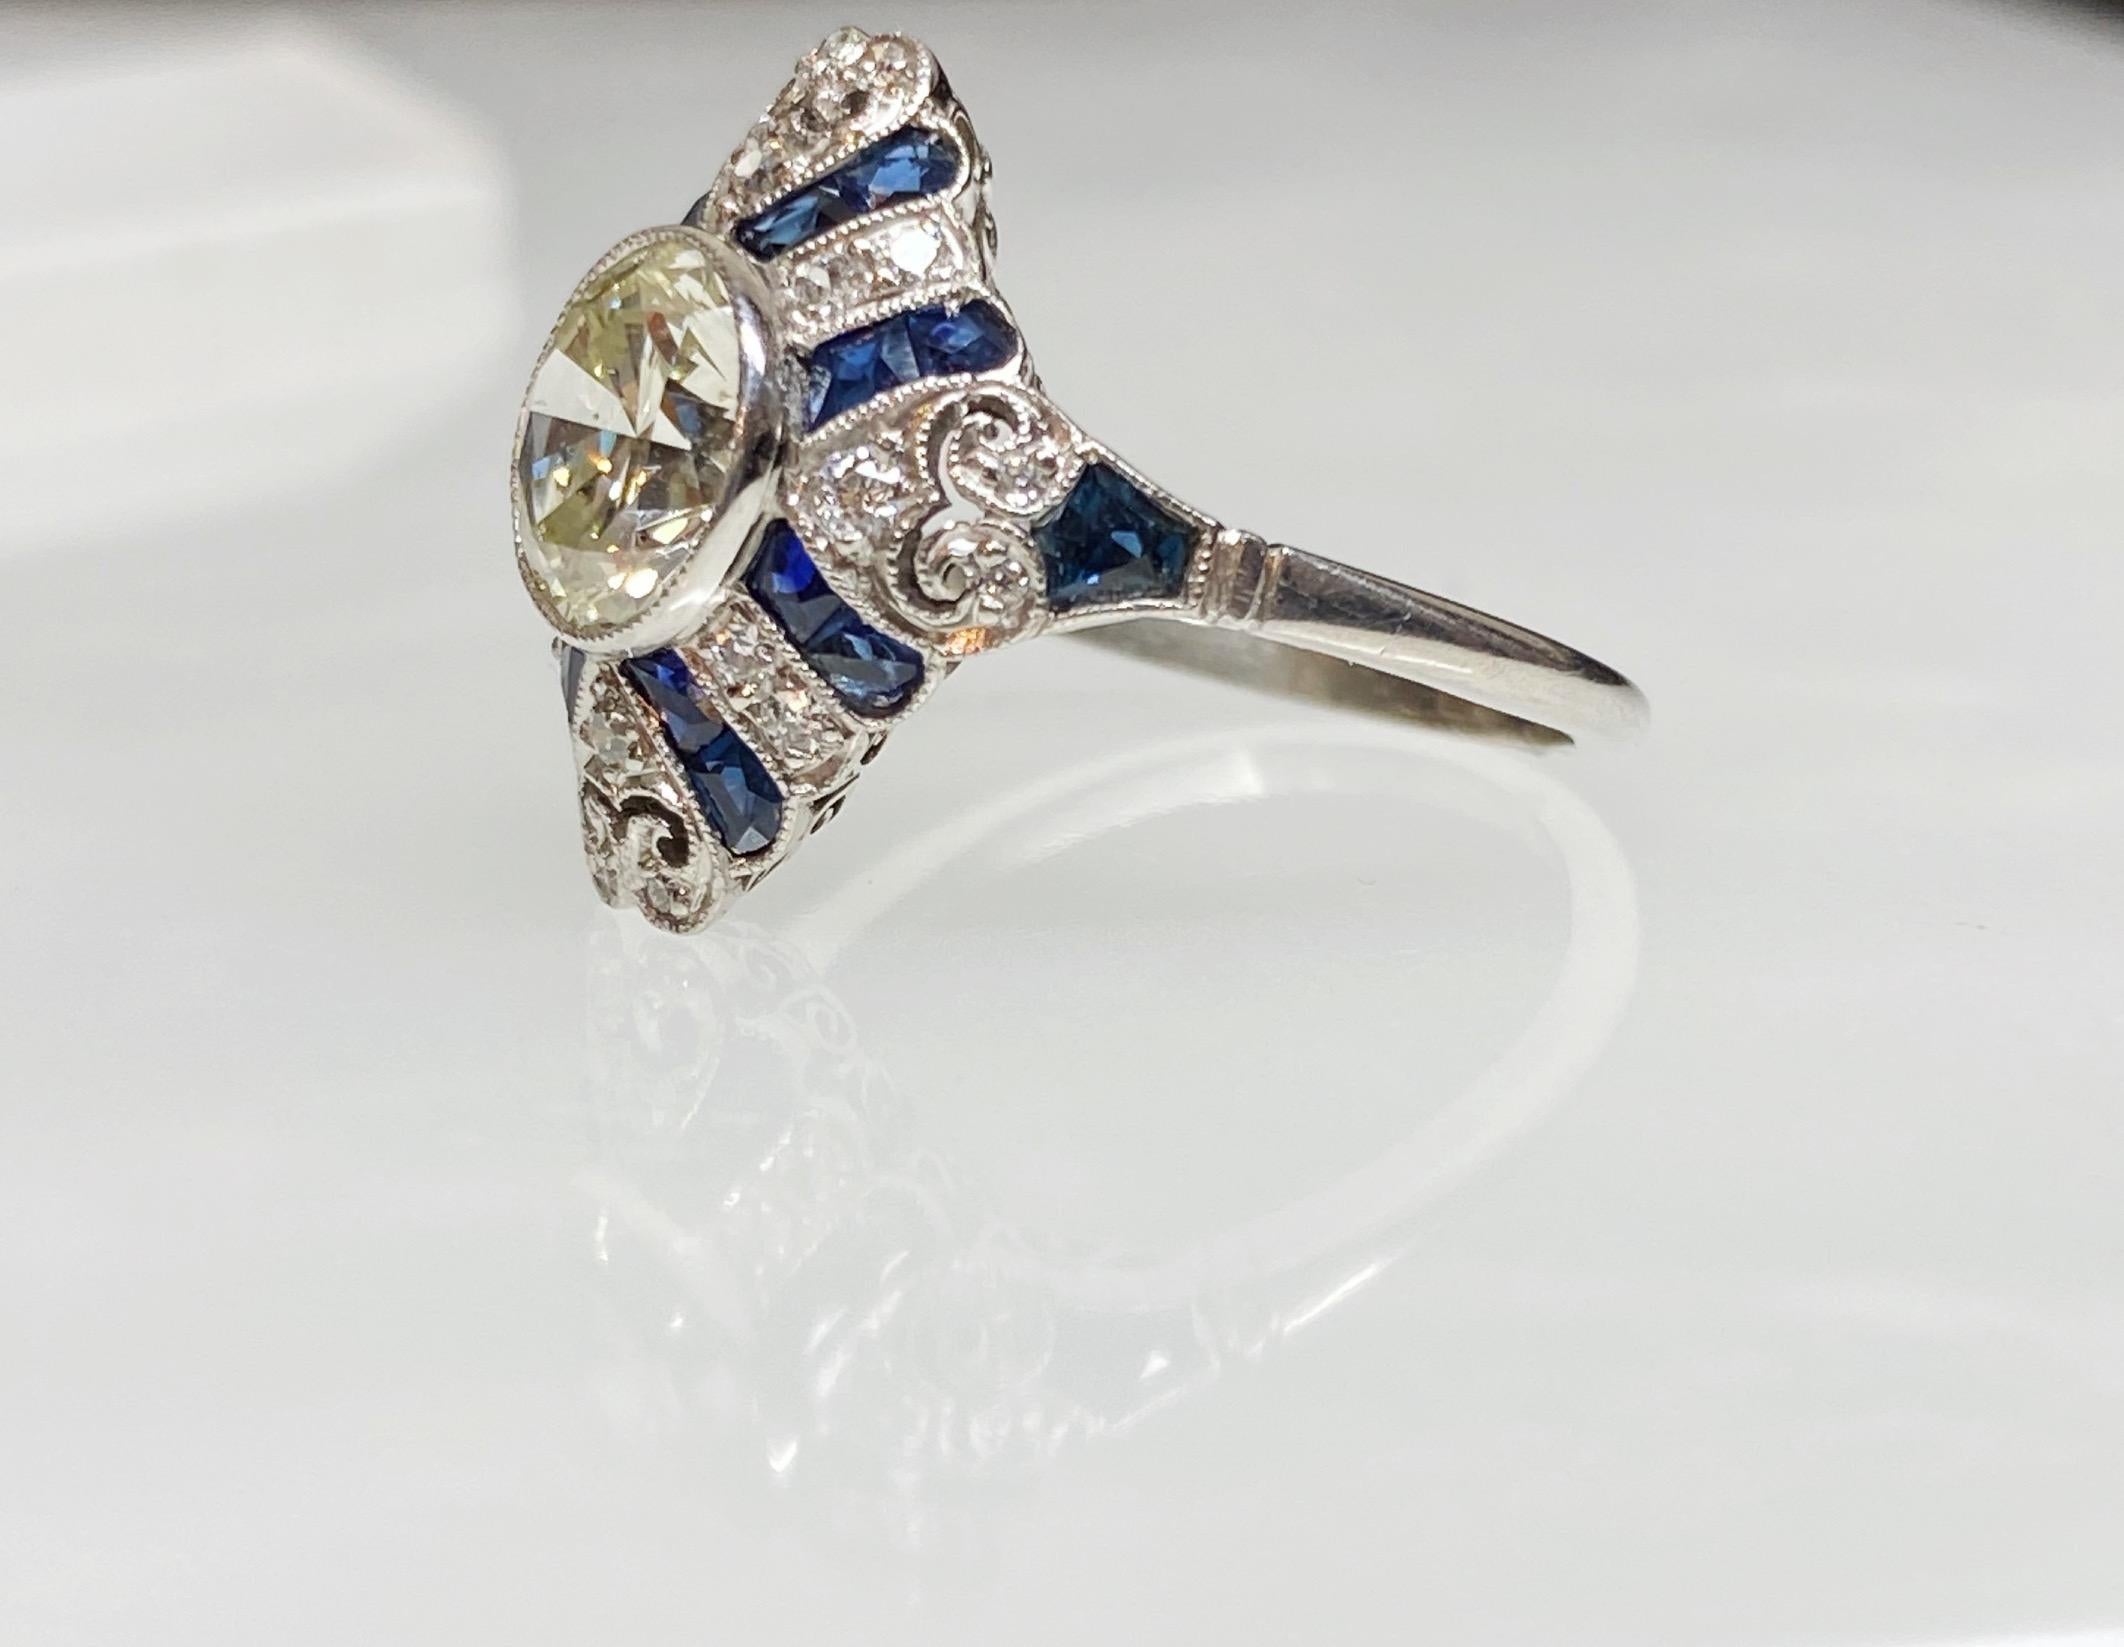 1.52 Carat Old European Cut Diamond and Sapphire Art Deco Inspired Ring For Sale 4